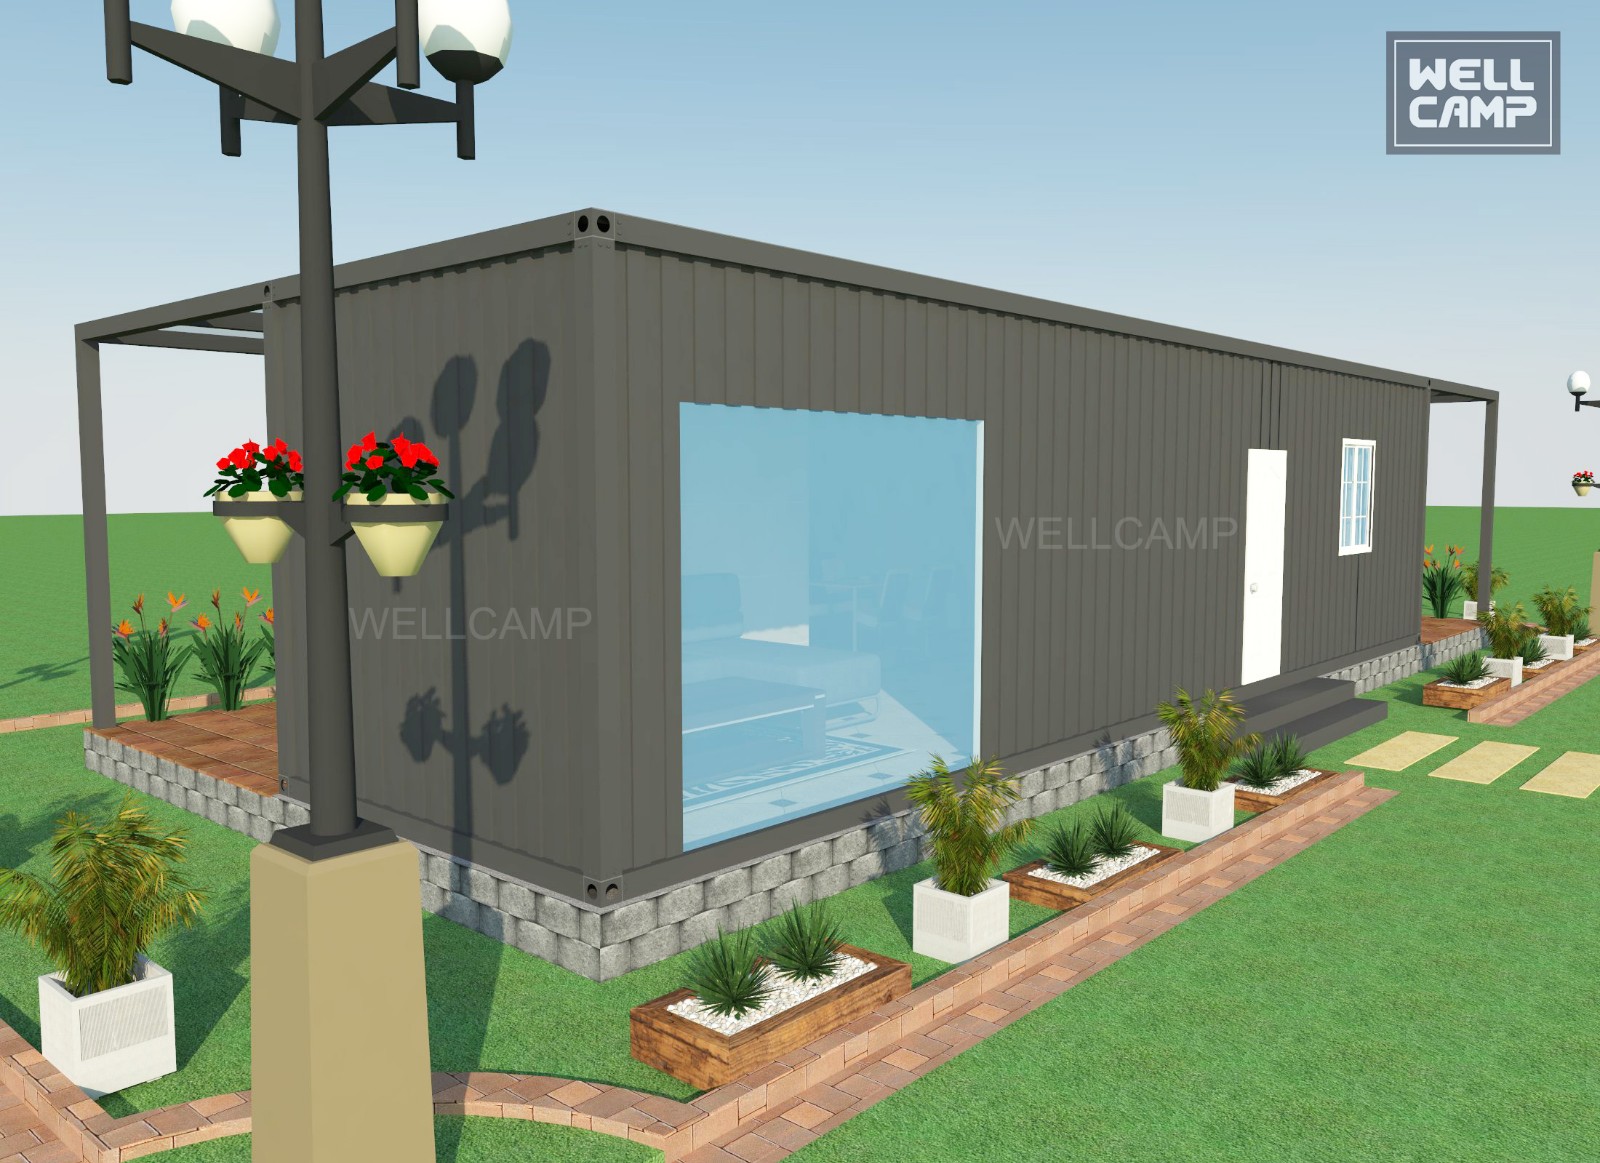 WELLCAMP, WELLCAMP prefab house, WELLCAMP container house Brand villa container customized light steel villa ecofriendly